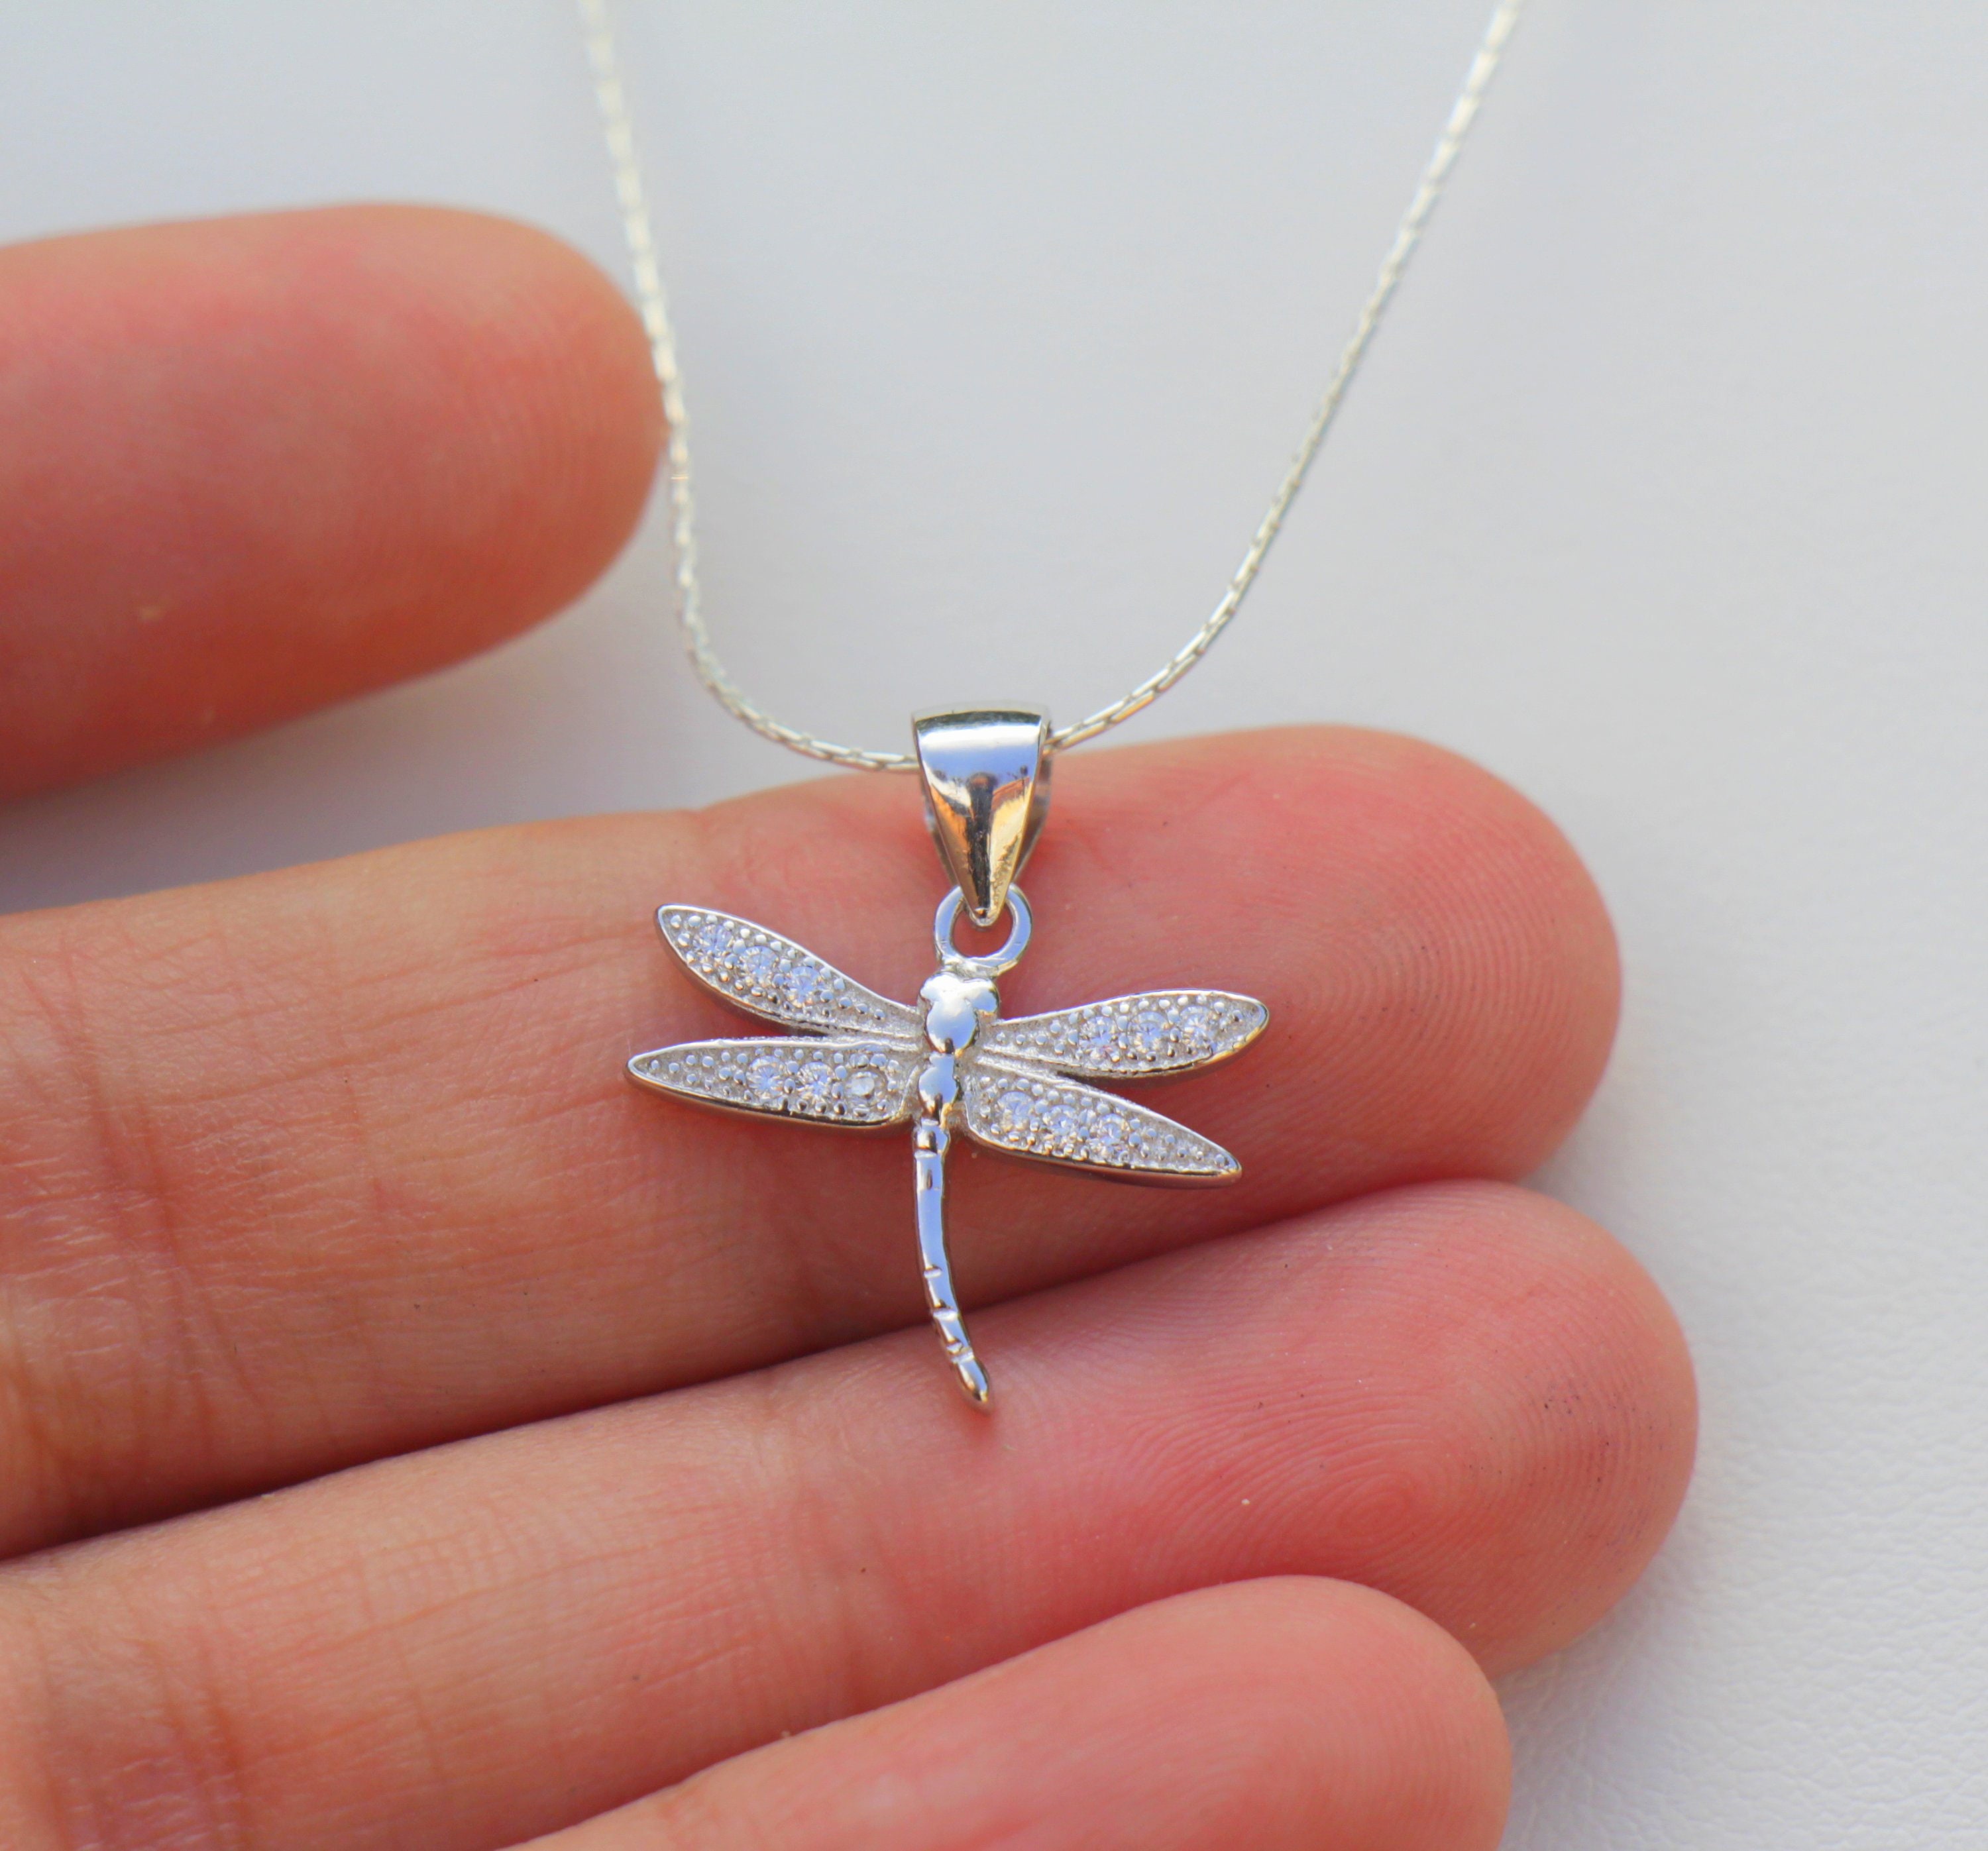 Dragonfly Necklace Amethyst/Iolite Sterling Silver/14K Yellow Gold | Jared